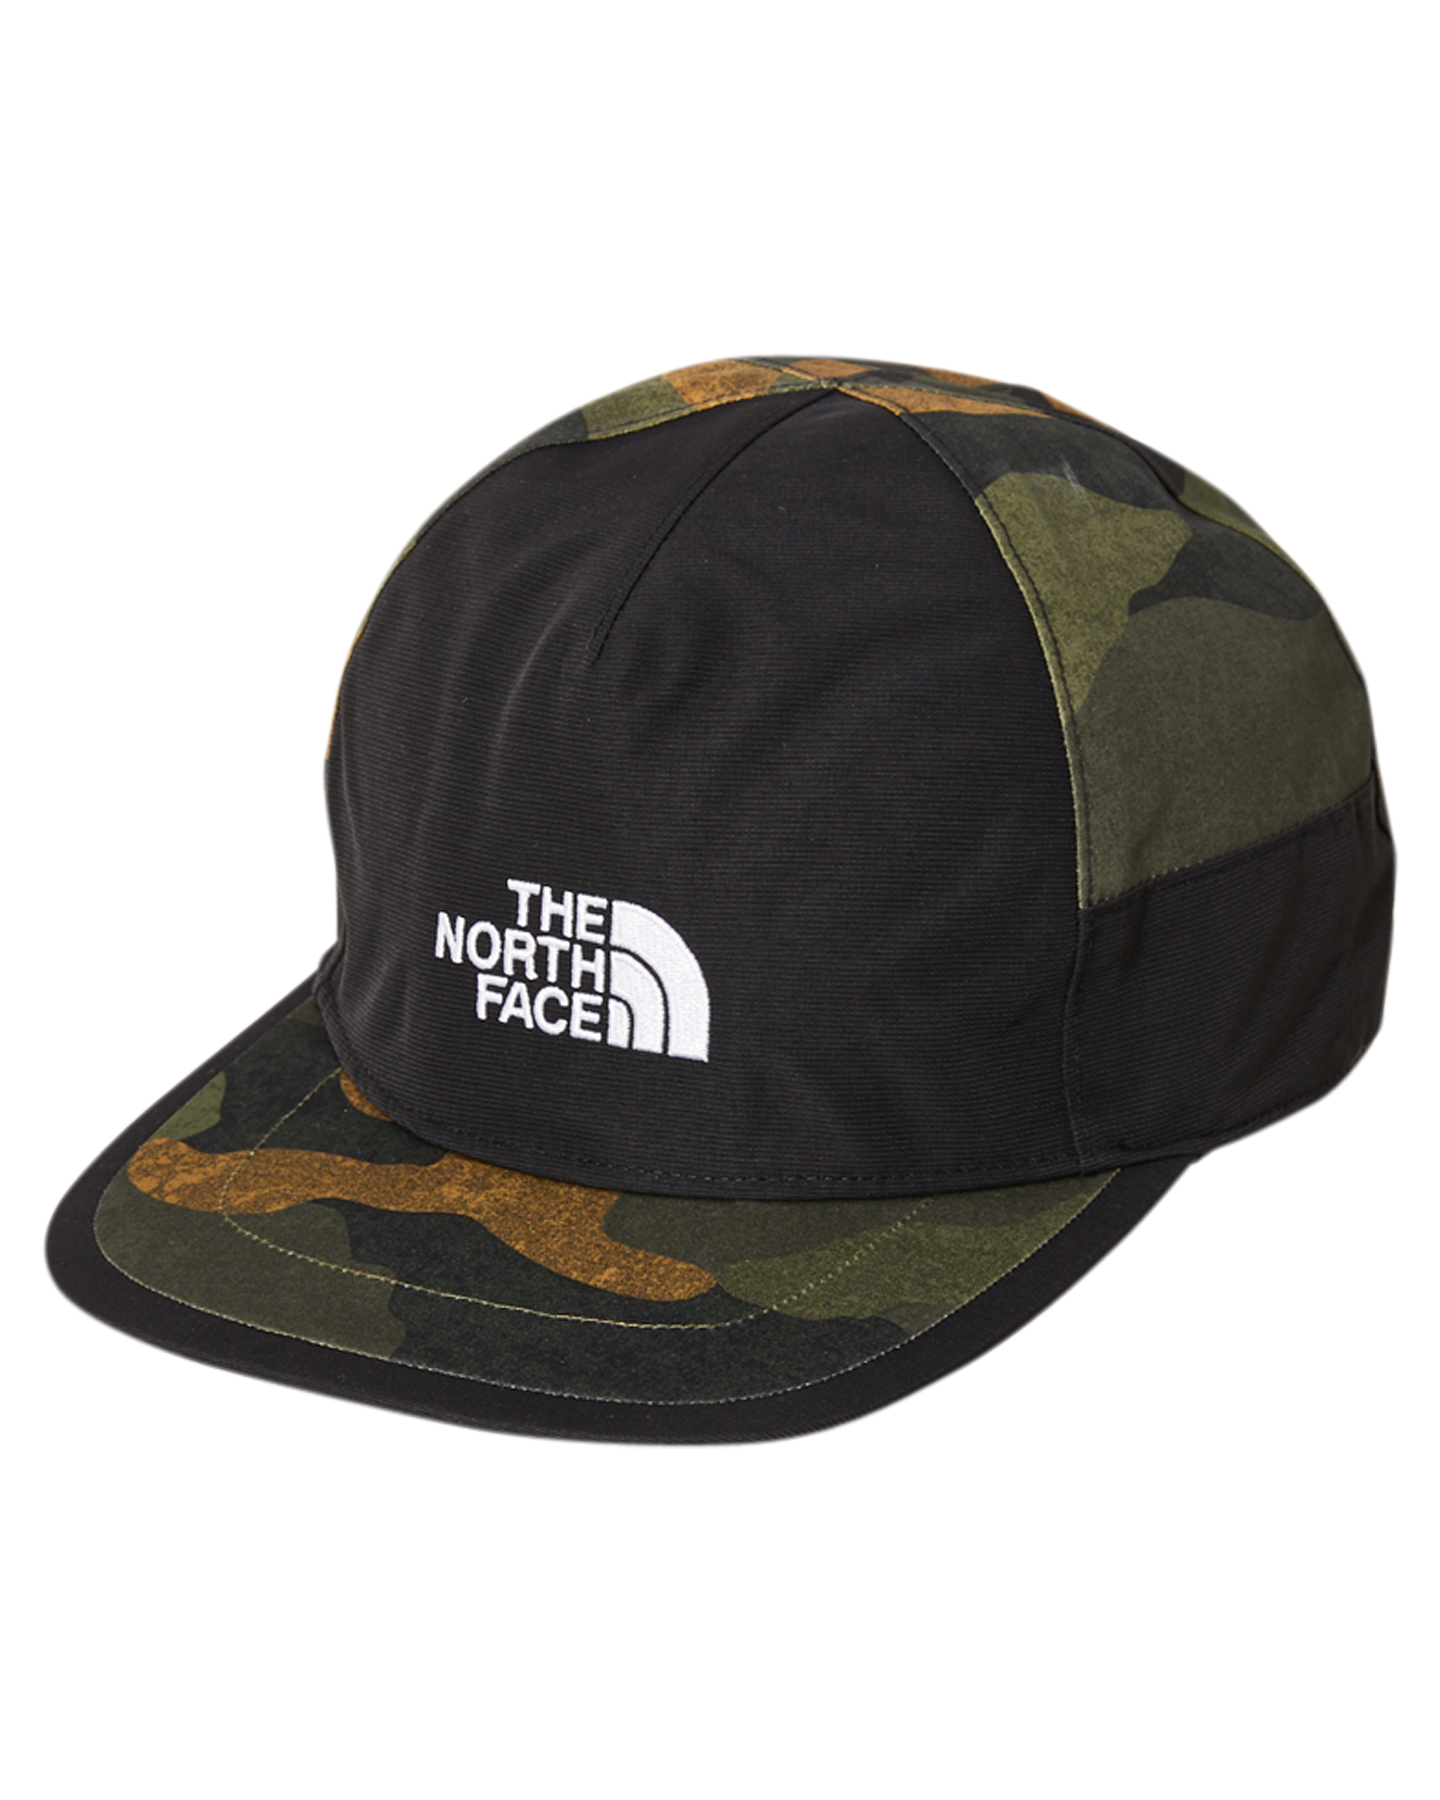 The North Face Gore-Tex Mountain Cap - Olive Green Camo | SurfStitch